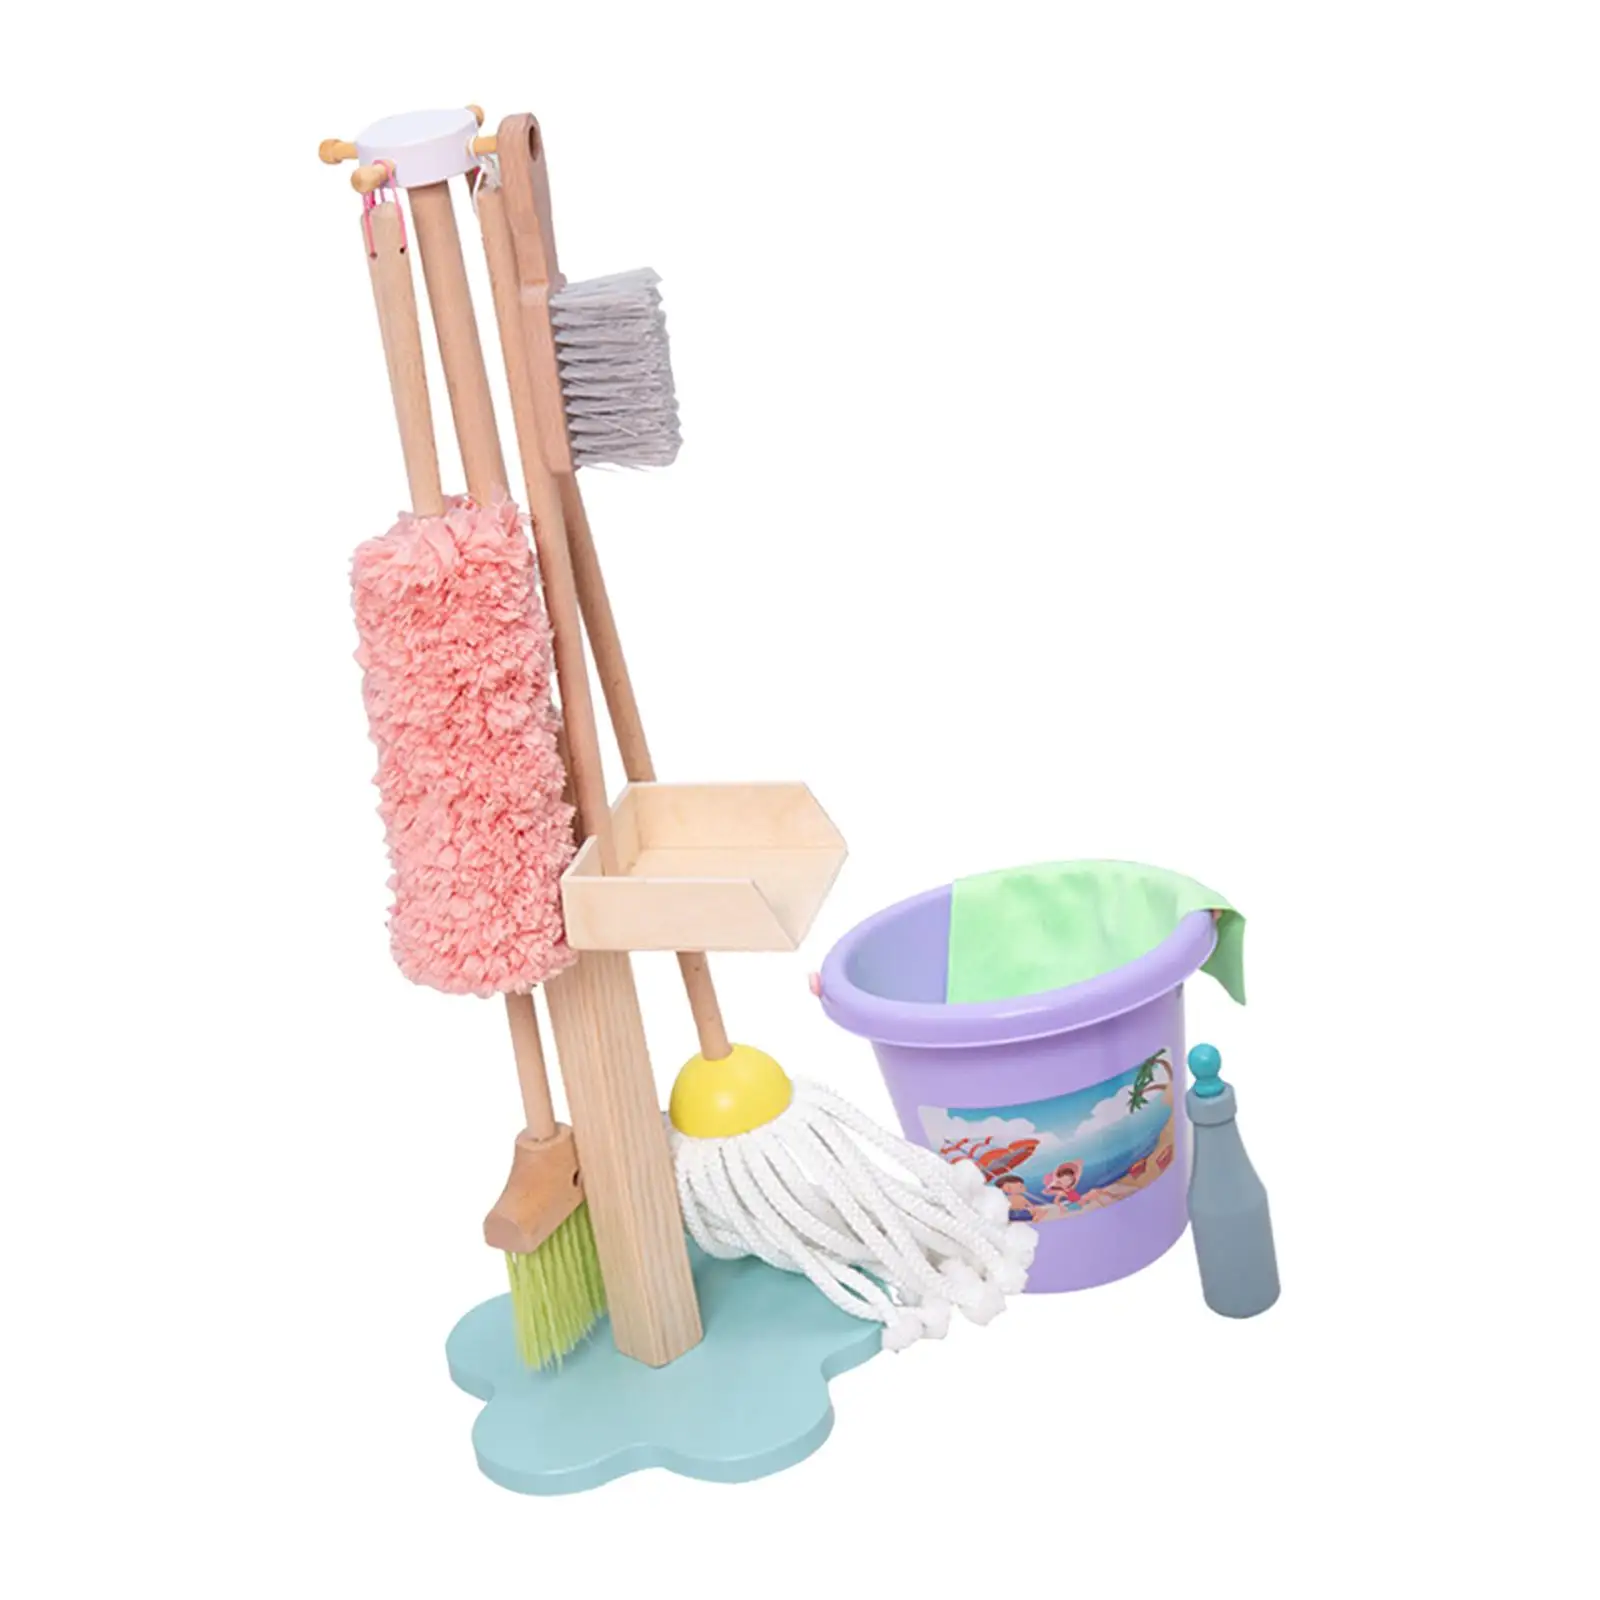 9x Simulation Broom and Cleaning Set Role Pretend Brush Organizing Stand